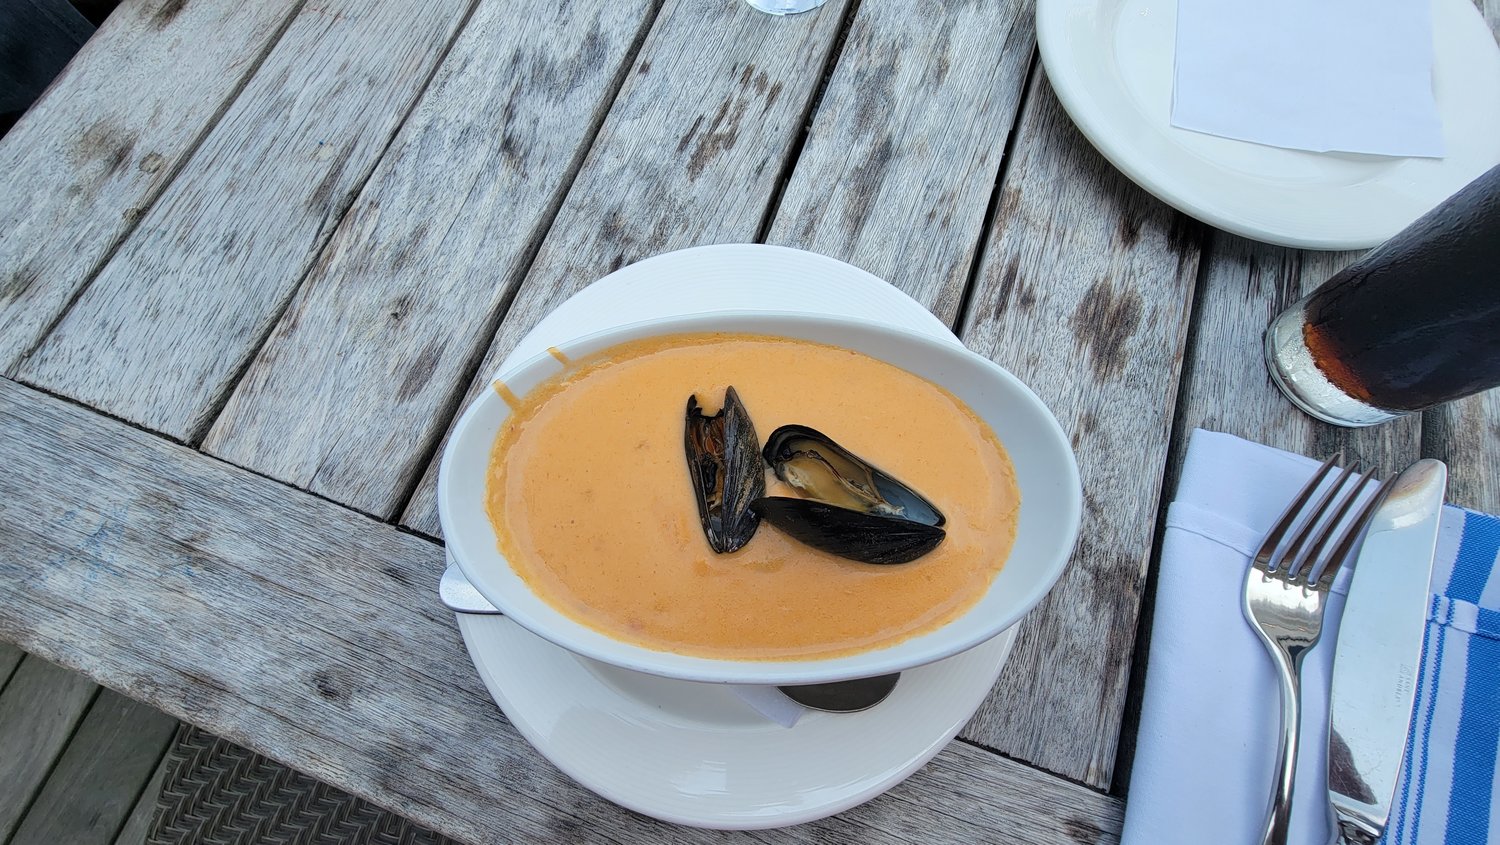 The lobster bisque is filled with chunks of lobster and topped with mussels.